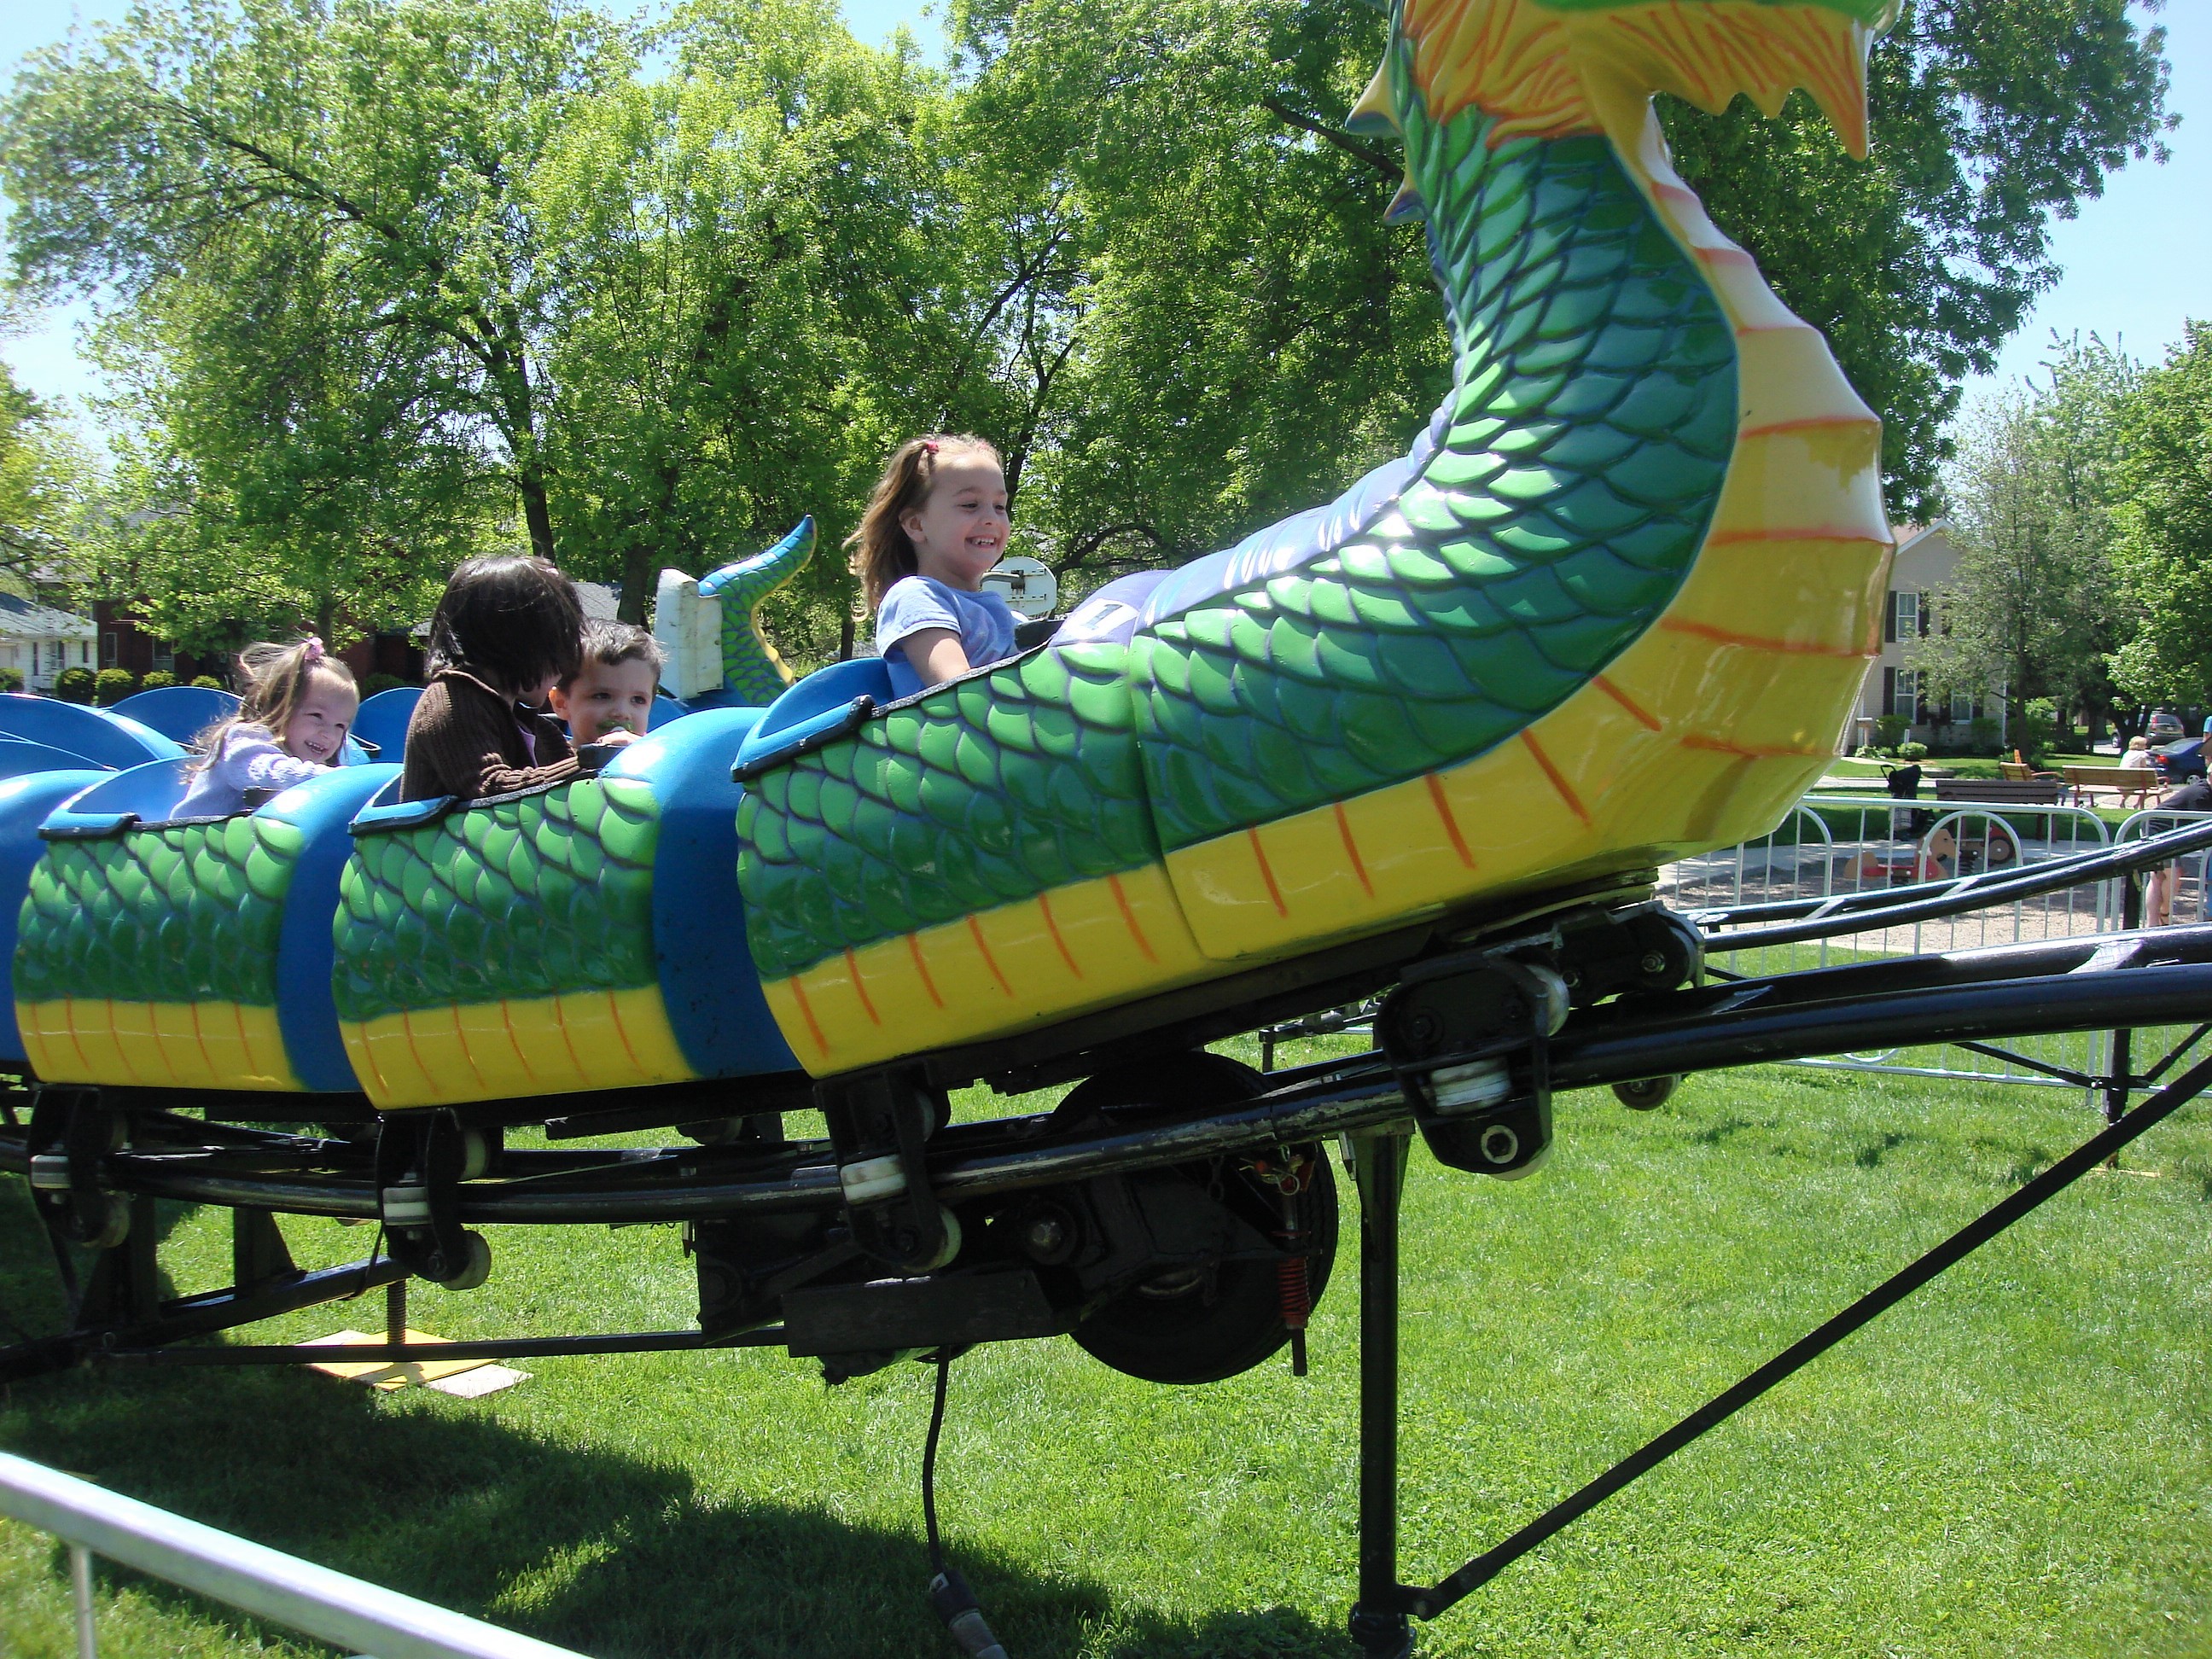 Photo of kids on a ride at the Plainfield Fest for an article about what's happening in Plainfield.